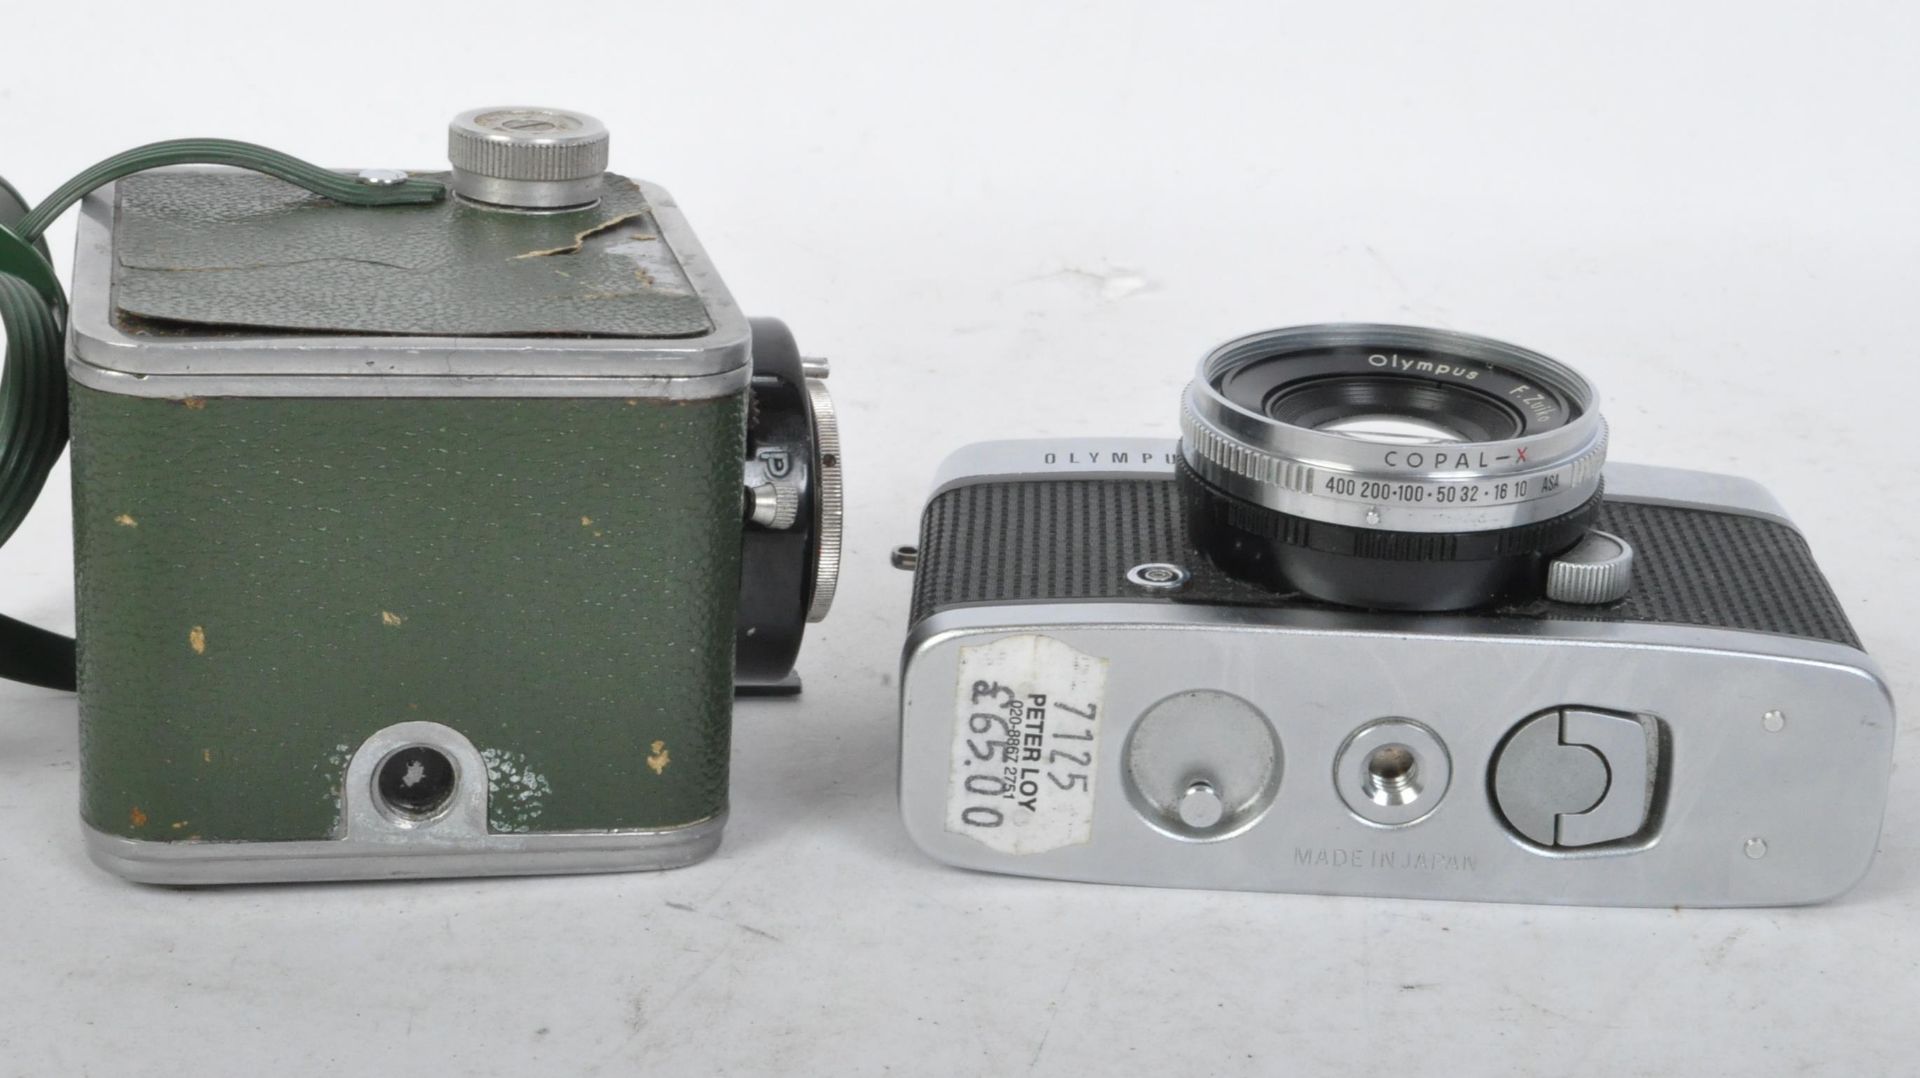 VINTAGE OLYMPUS PEN-D CAMERA WITH RONDINE BOX CAMERA - Image 5 of 5